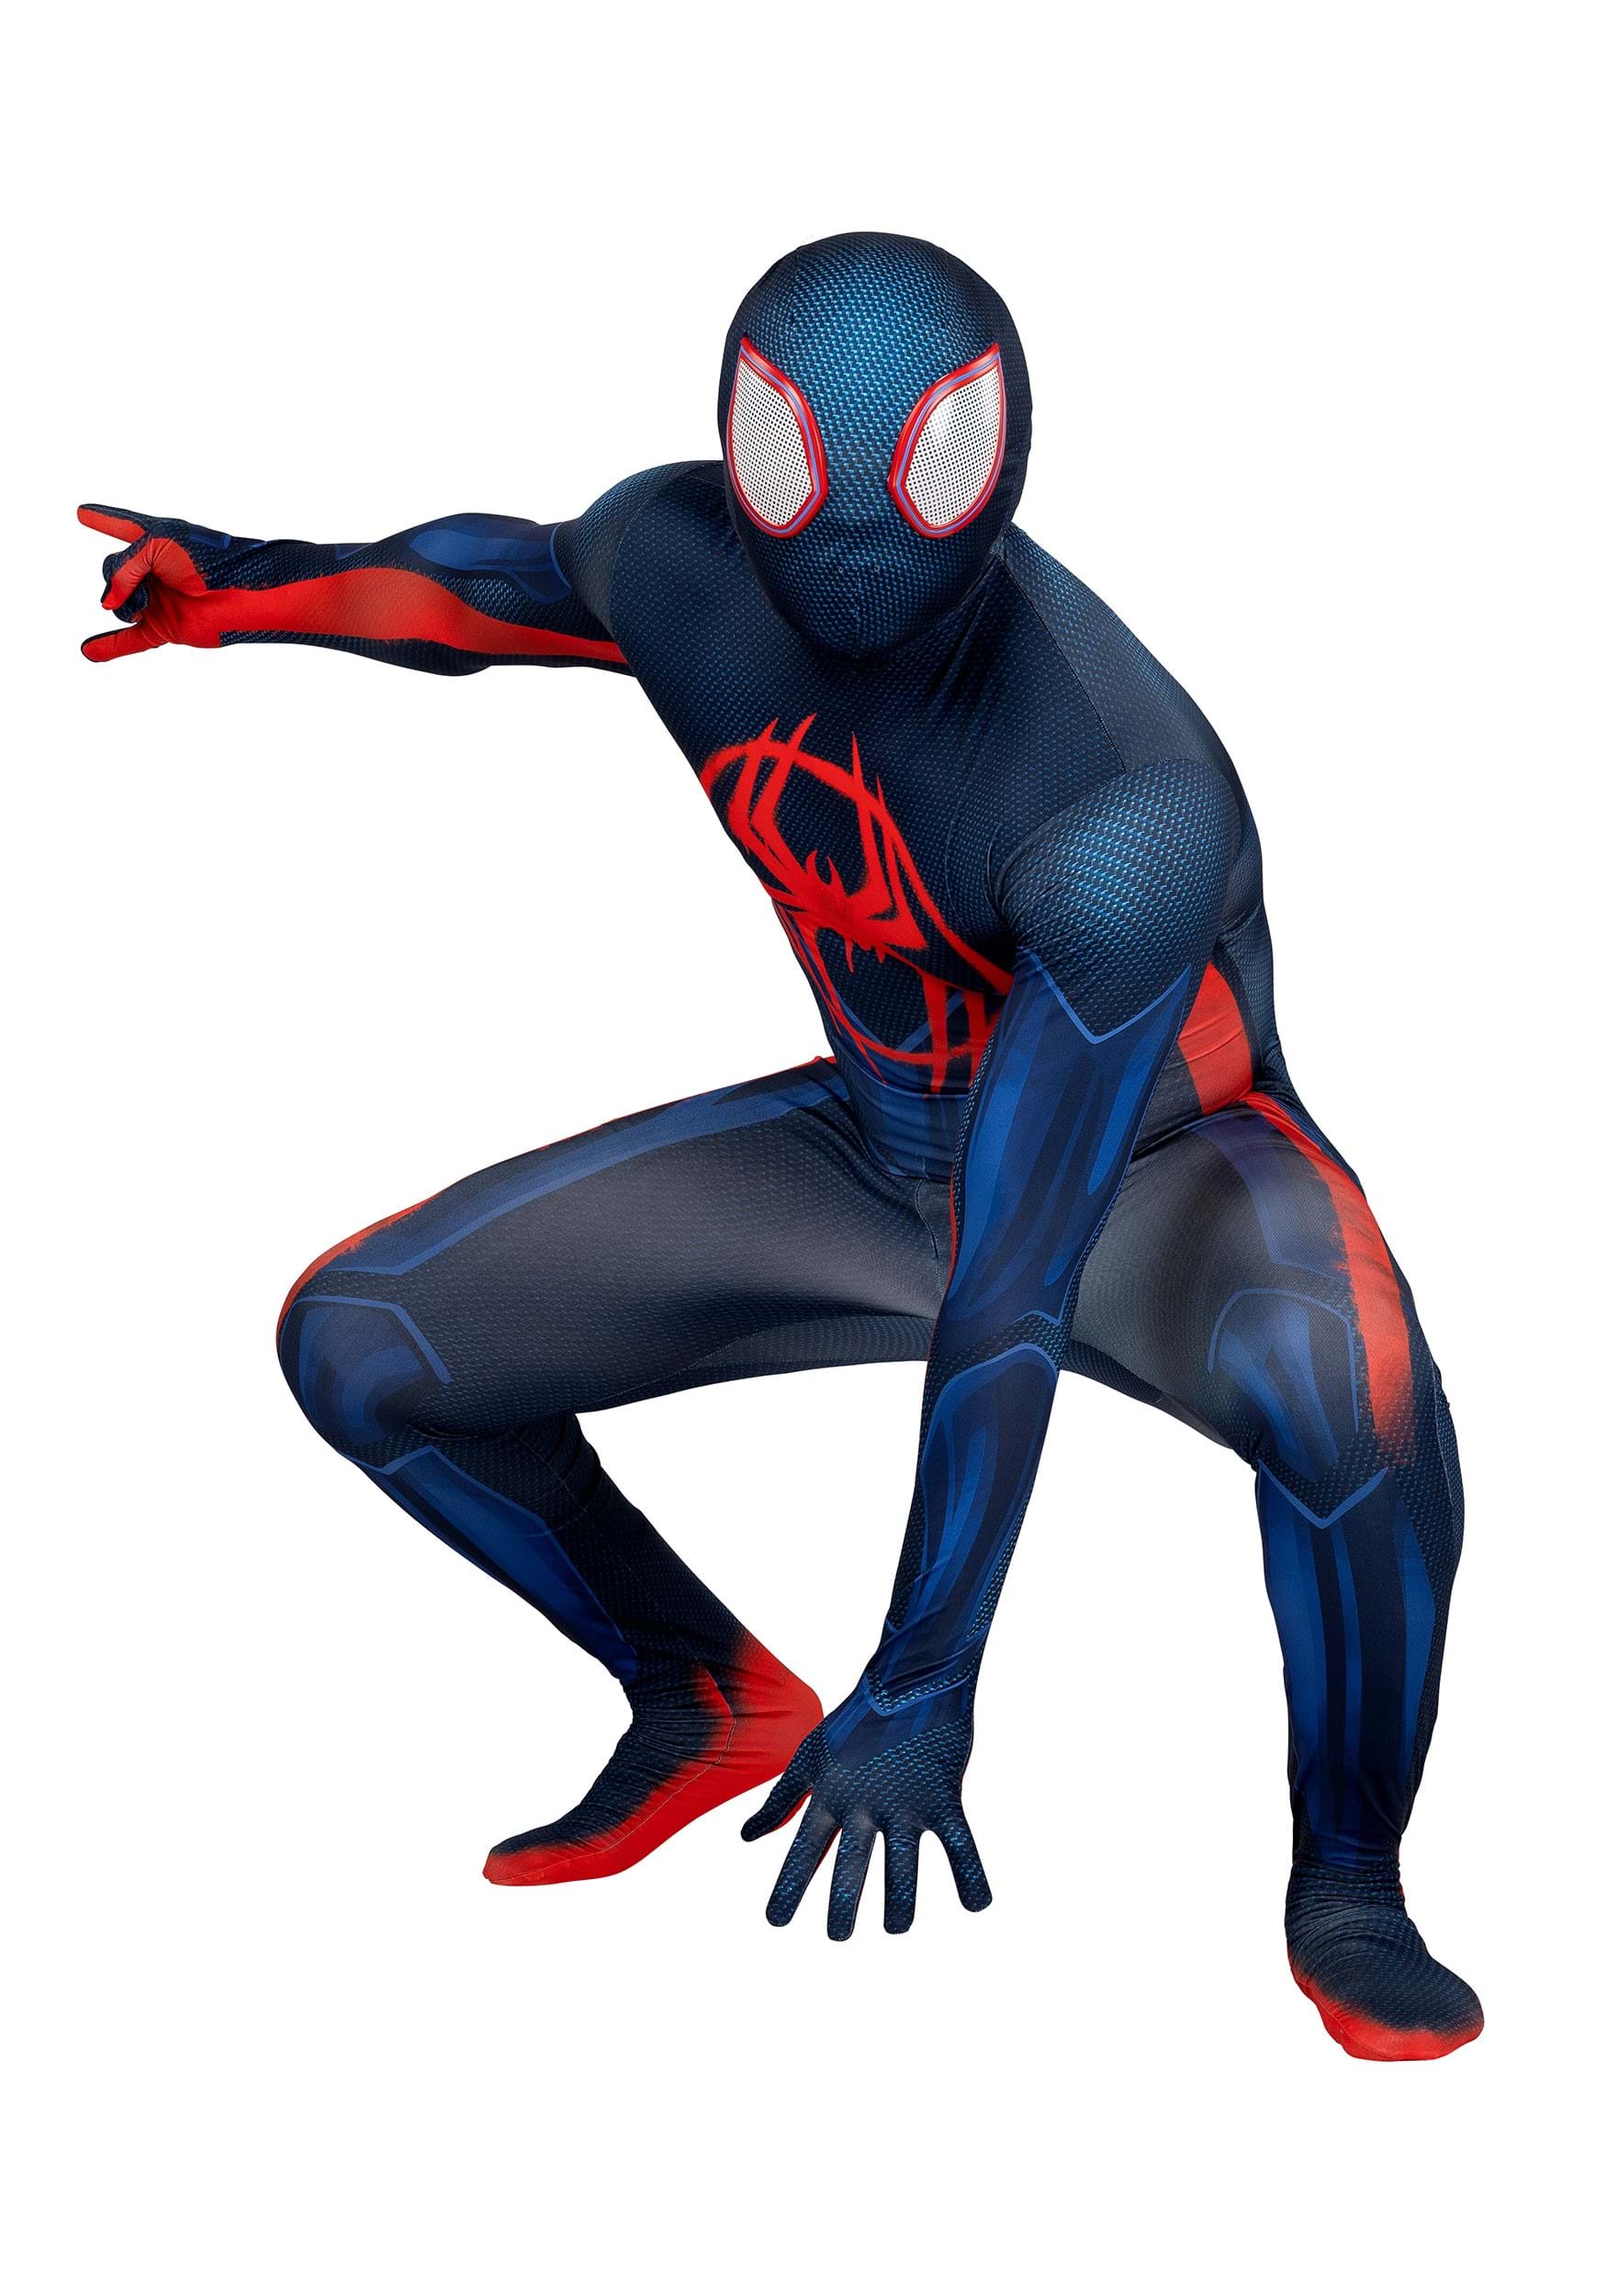 https://images.halloweencostumes.com/products/93113/1-1/spiderverse-2-adult-miles-morales-zentai-suit-main-upd.jpg